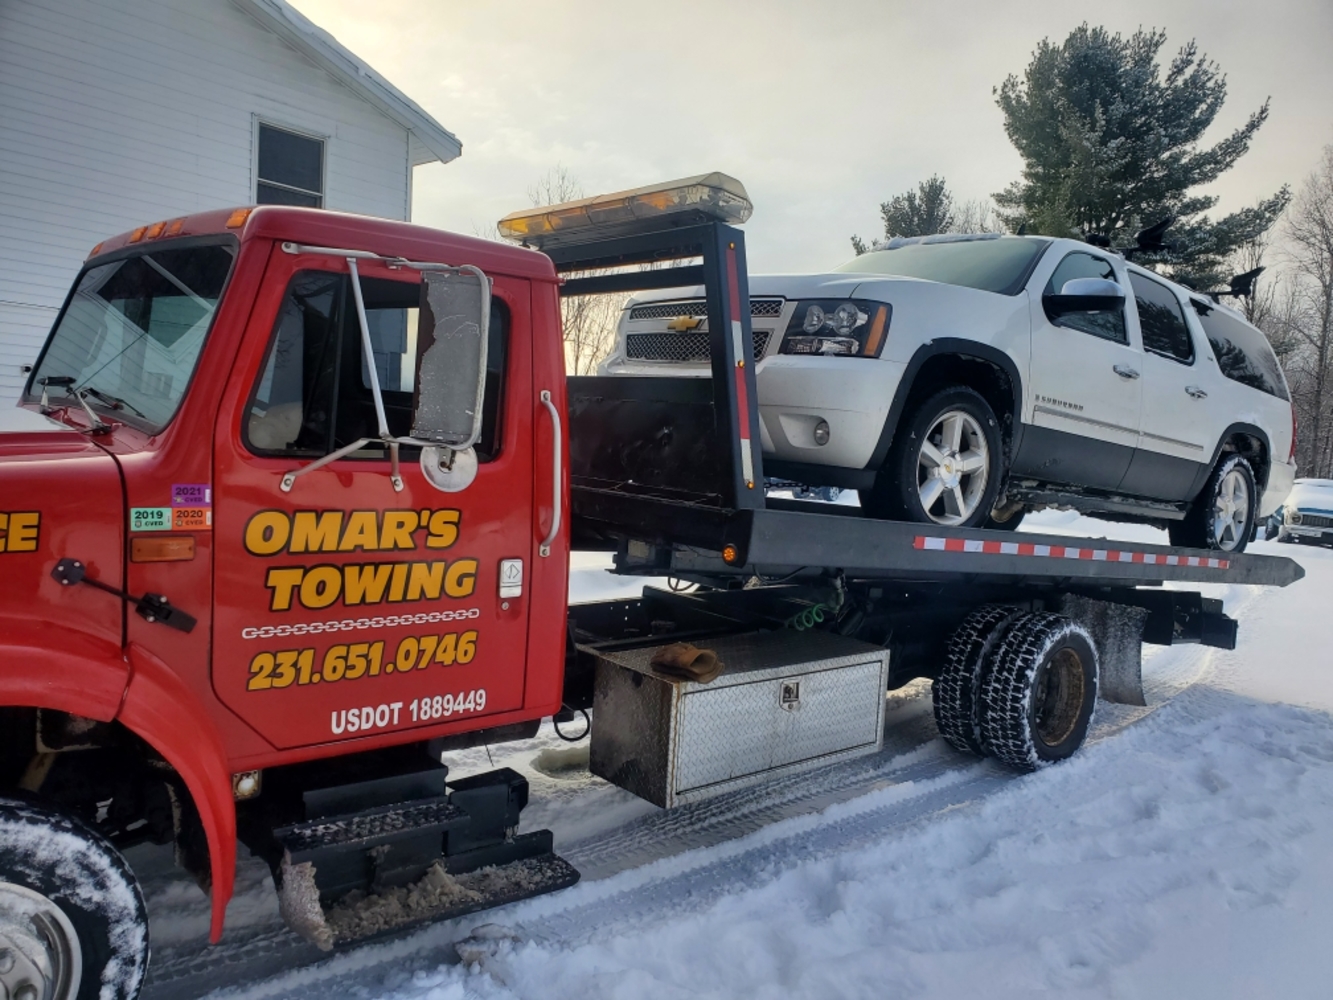 Omar's Towing